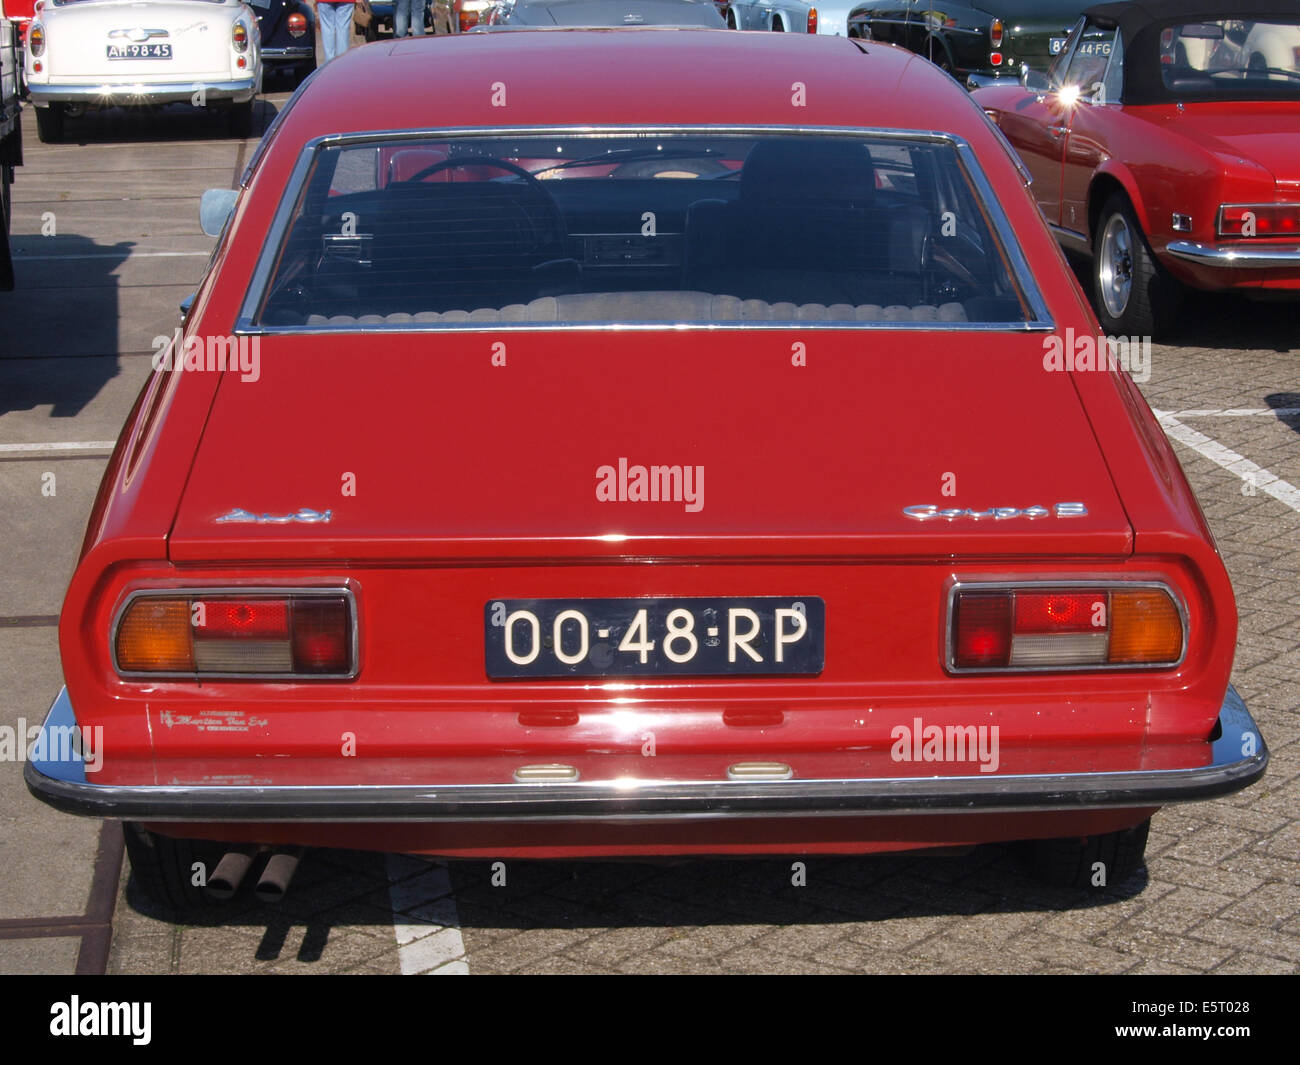 Audi 100 Coupe S, build in 1977, Dutch licence registration 00-48-RP, at IJmuiden, The Netherlands, pic1 Stock Photo